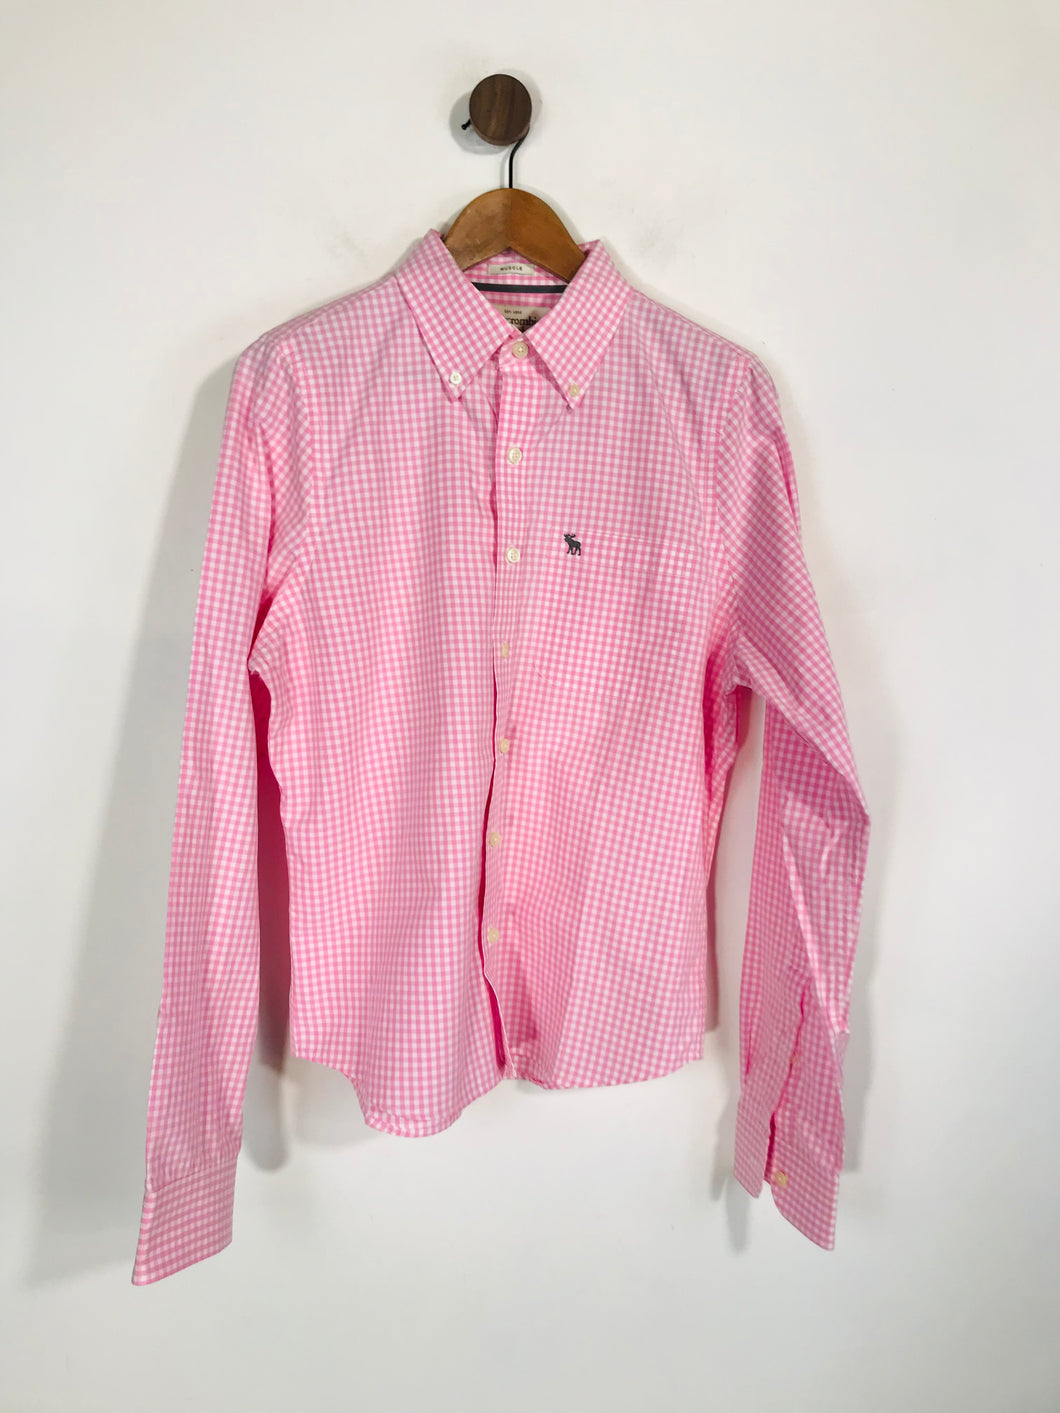 Abercrombie & Fitch Men's Cotton Check Gingham Button-Up Shirt | L | Pink